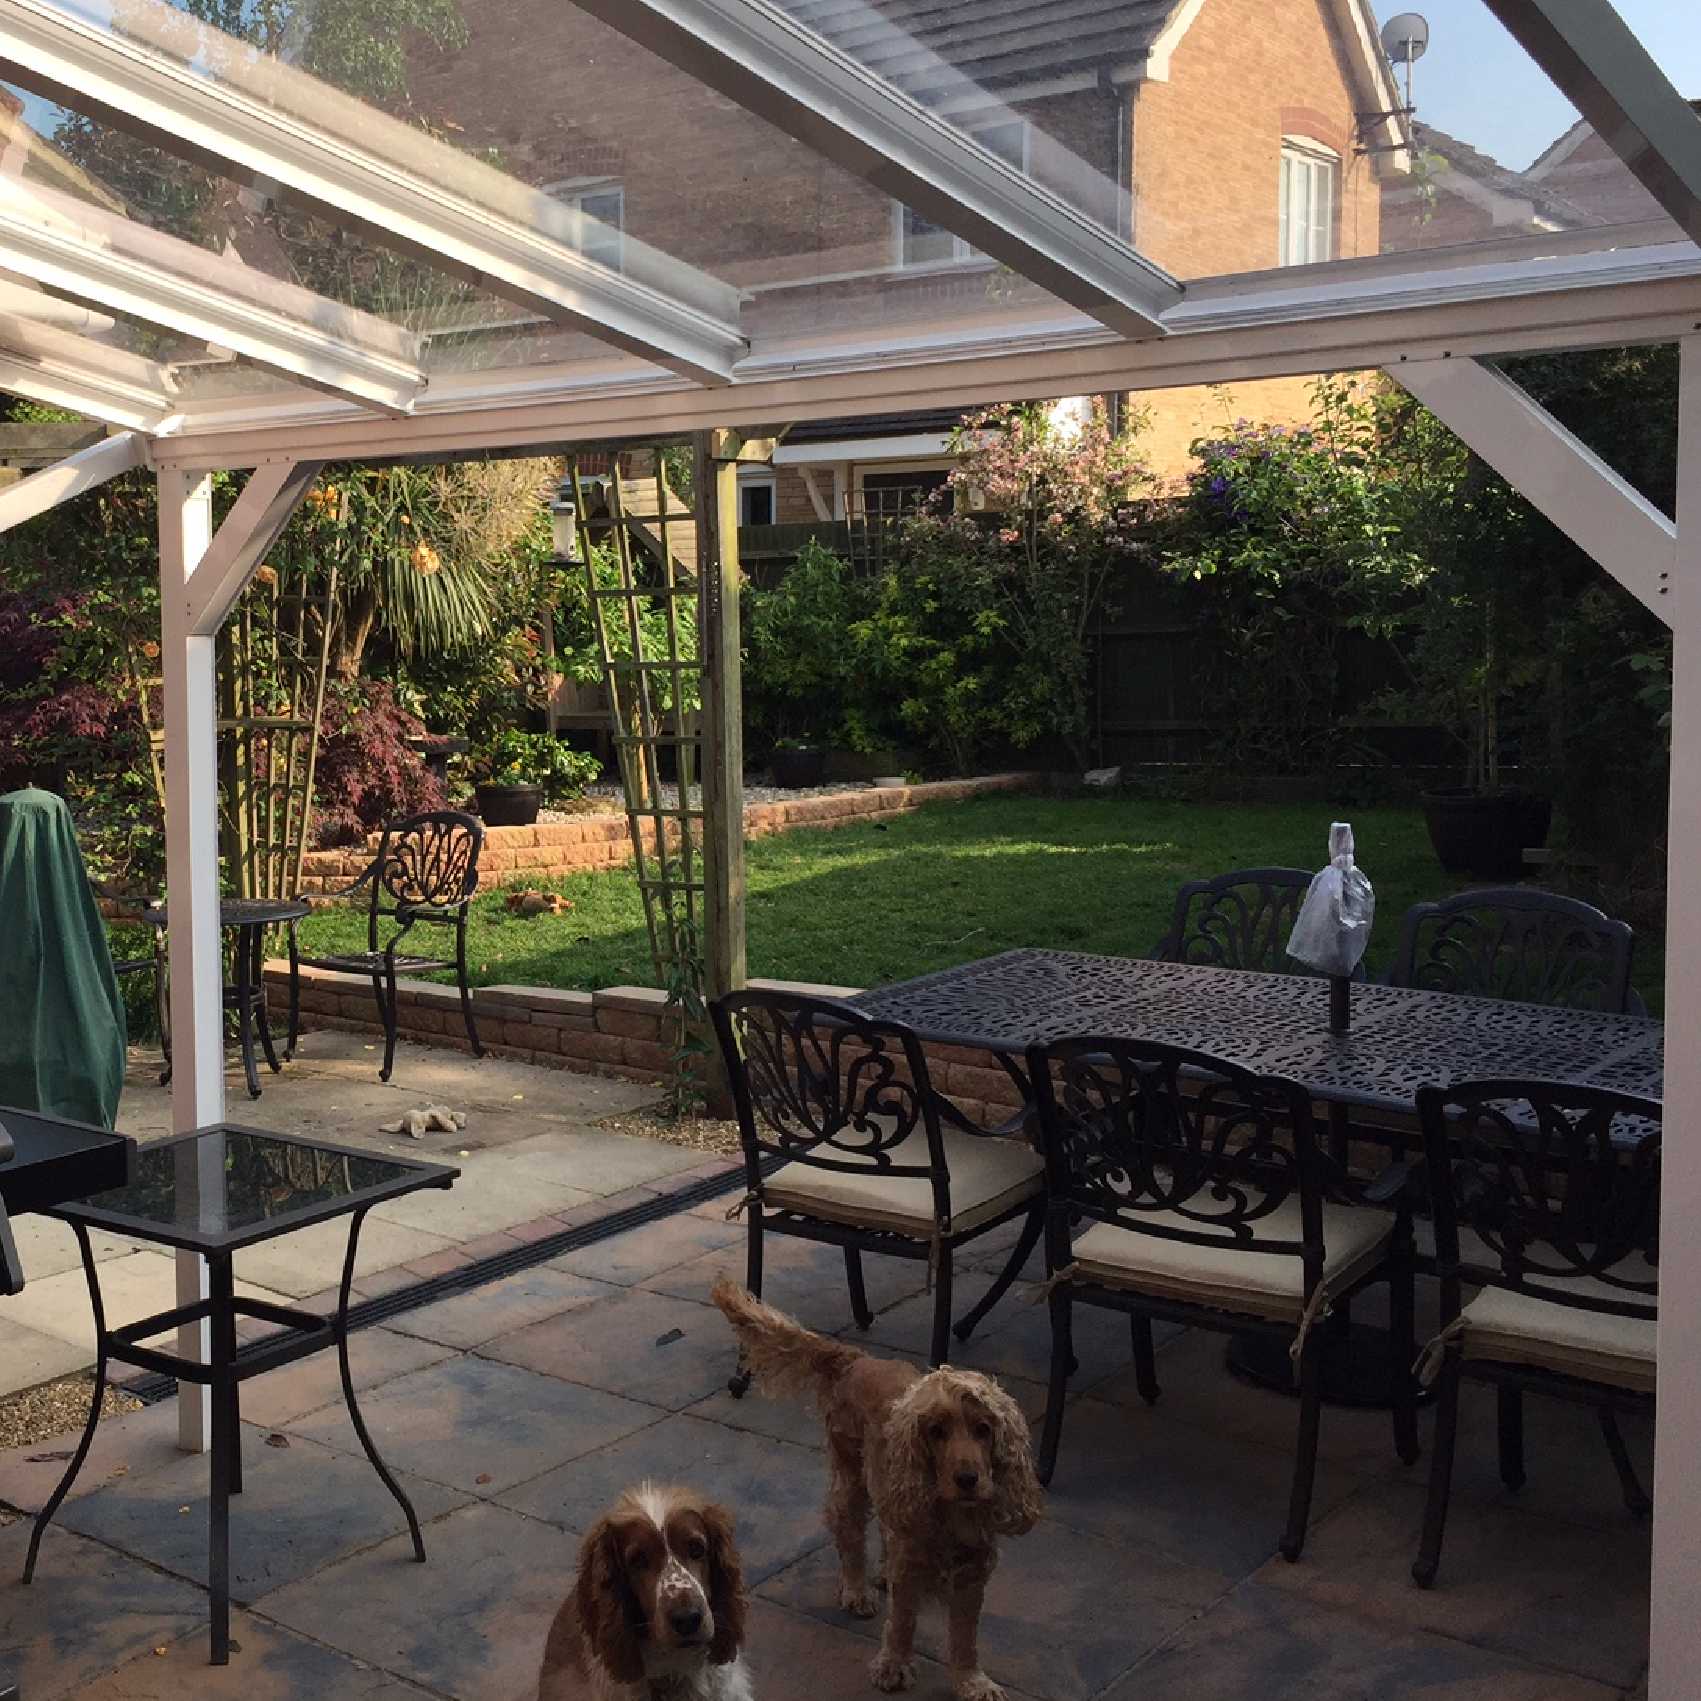 Affordable Omega Smart Lean-To Canopy, White UNGLAZED for 6mm Glazing - 2.8m (W) x 2.5m (P), (2) Supporting Posts